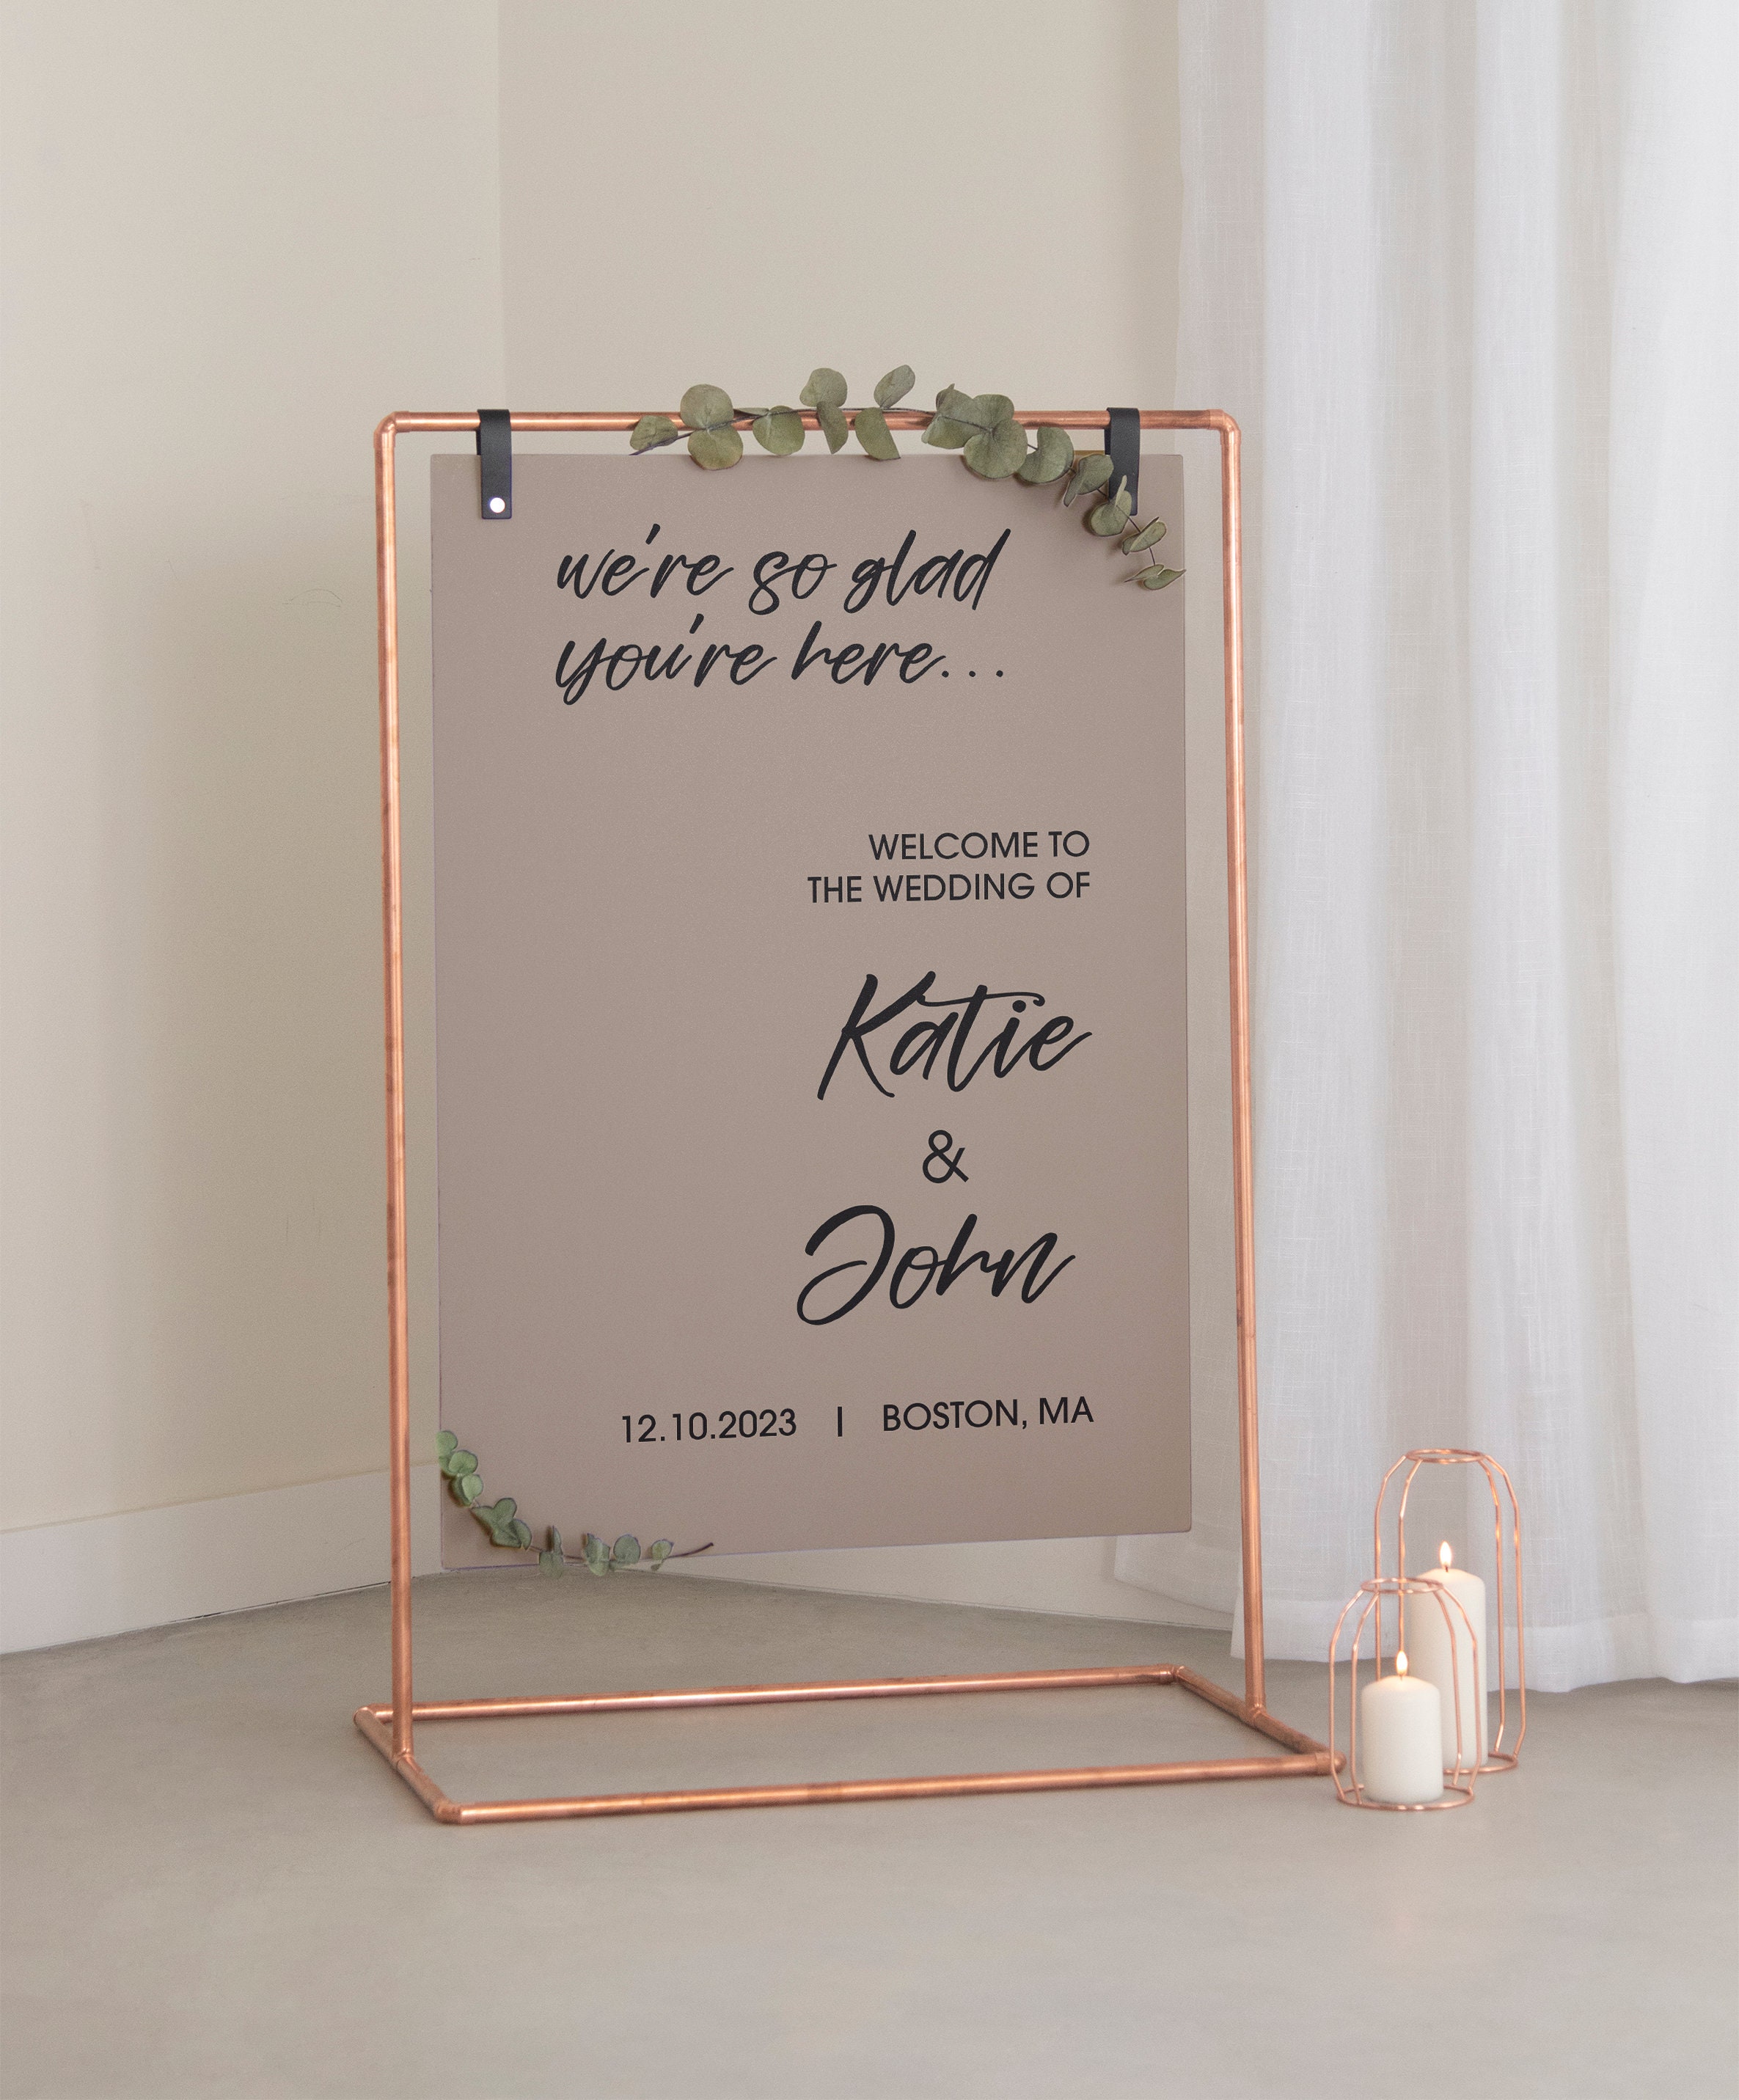 Unforgettable African-Inspired Wedding Welcome Sign – Lead Designs Co